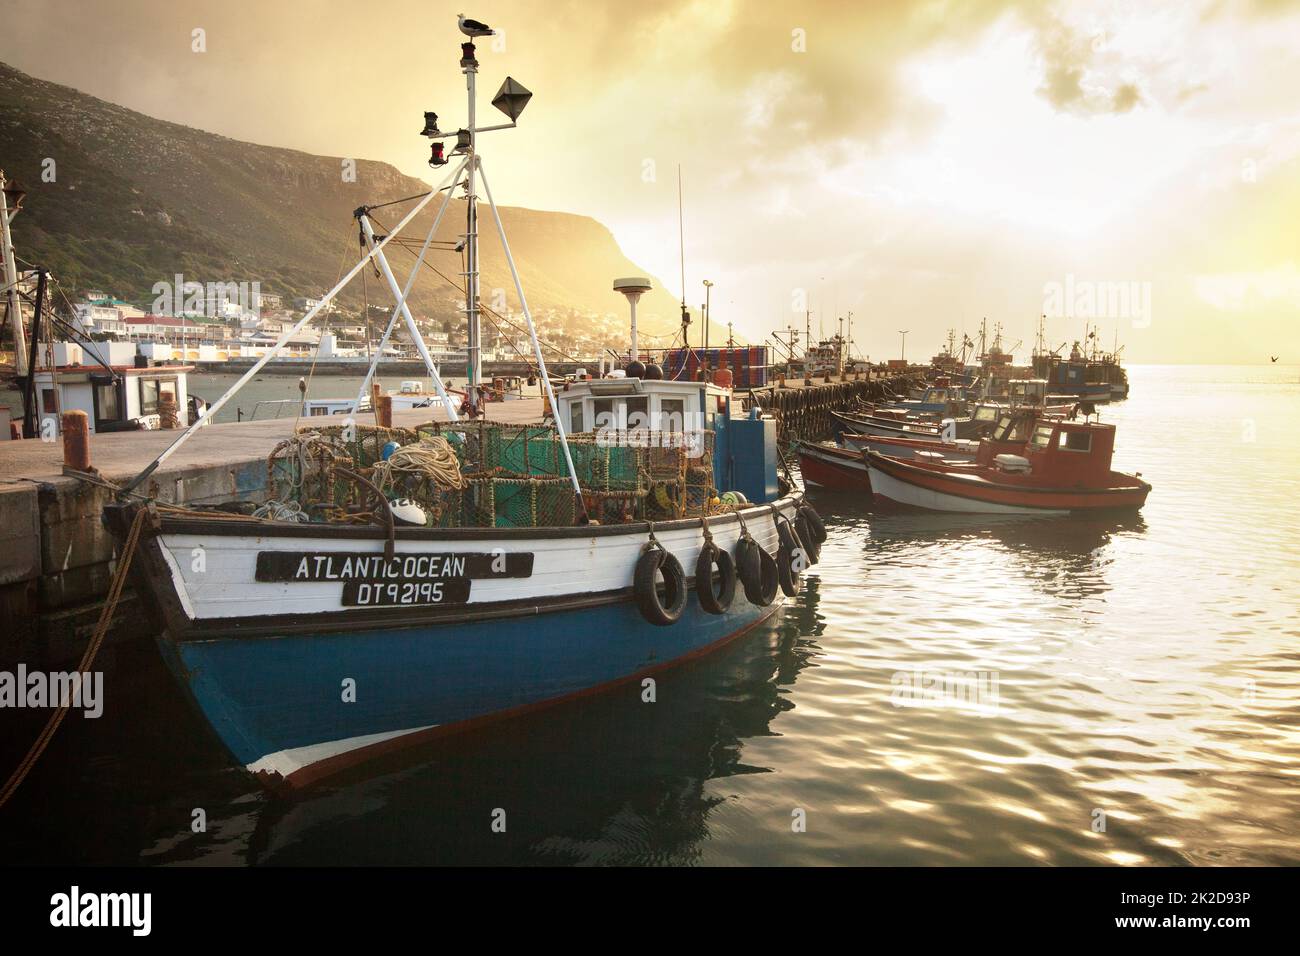 Moored in port. A view of a fishing trawler in the harbor. Stock Photo